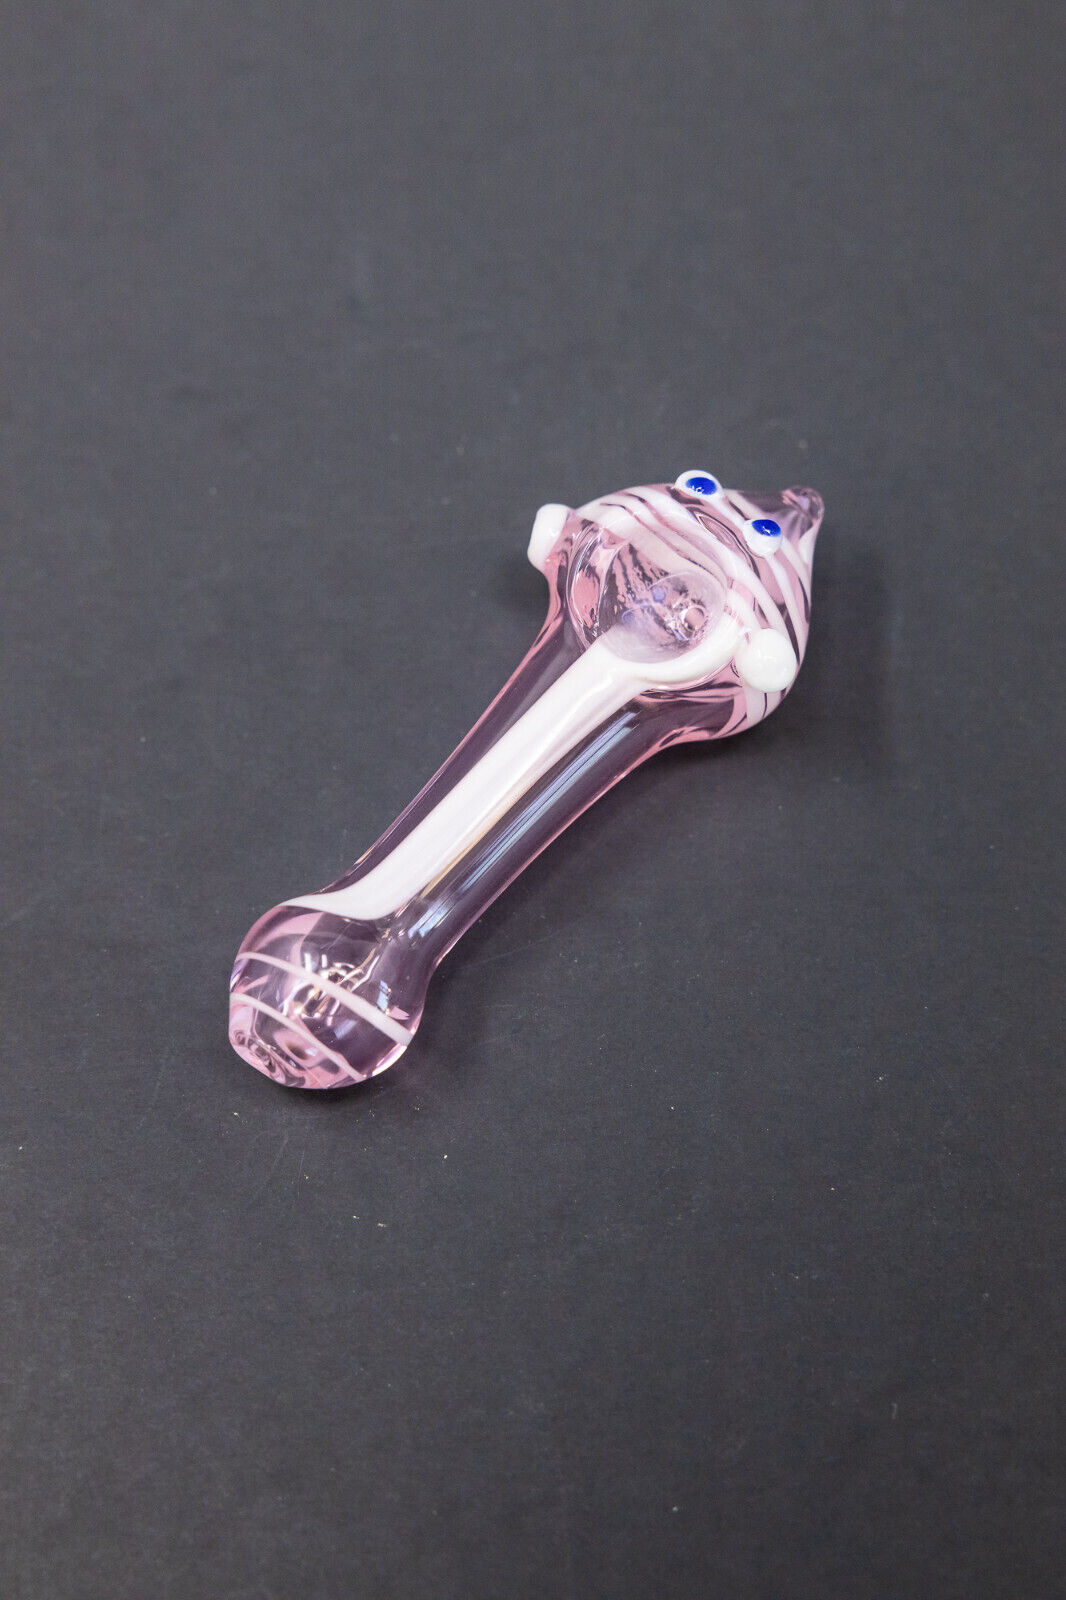 4 Pink Googly Eye TOBACCO Glass Hand Smoking Pipe w/ Carb Hole - Fast Shipping. Available Now for 9.99